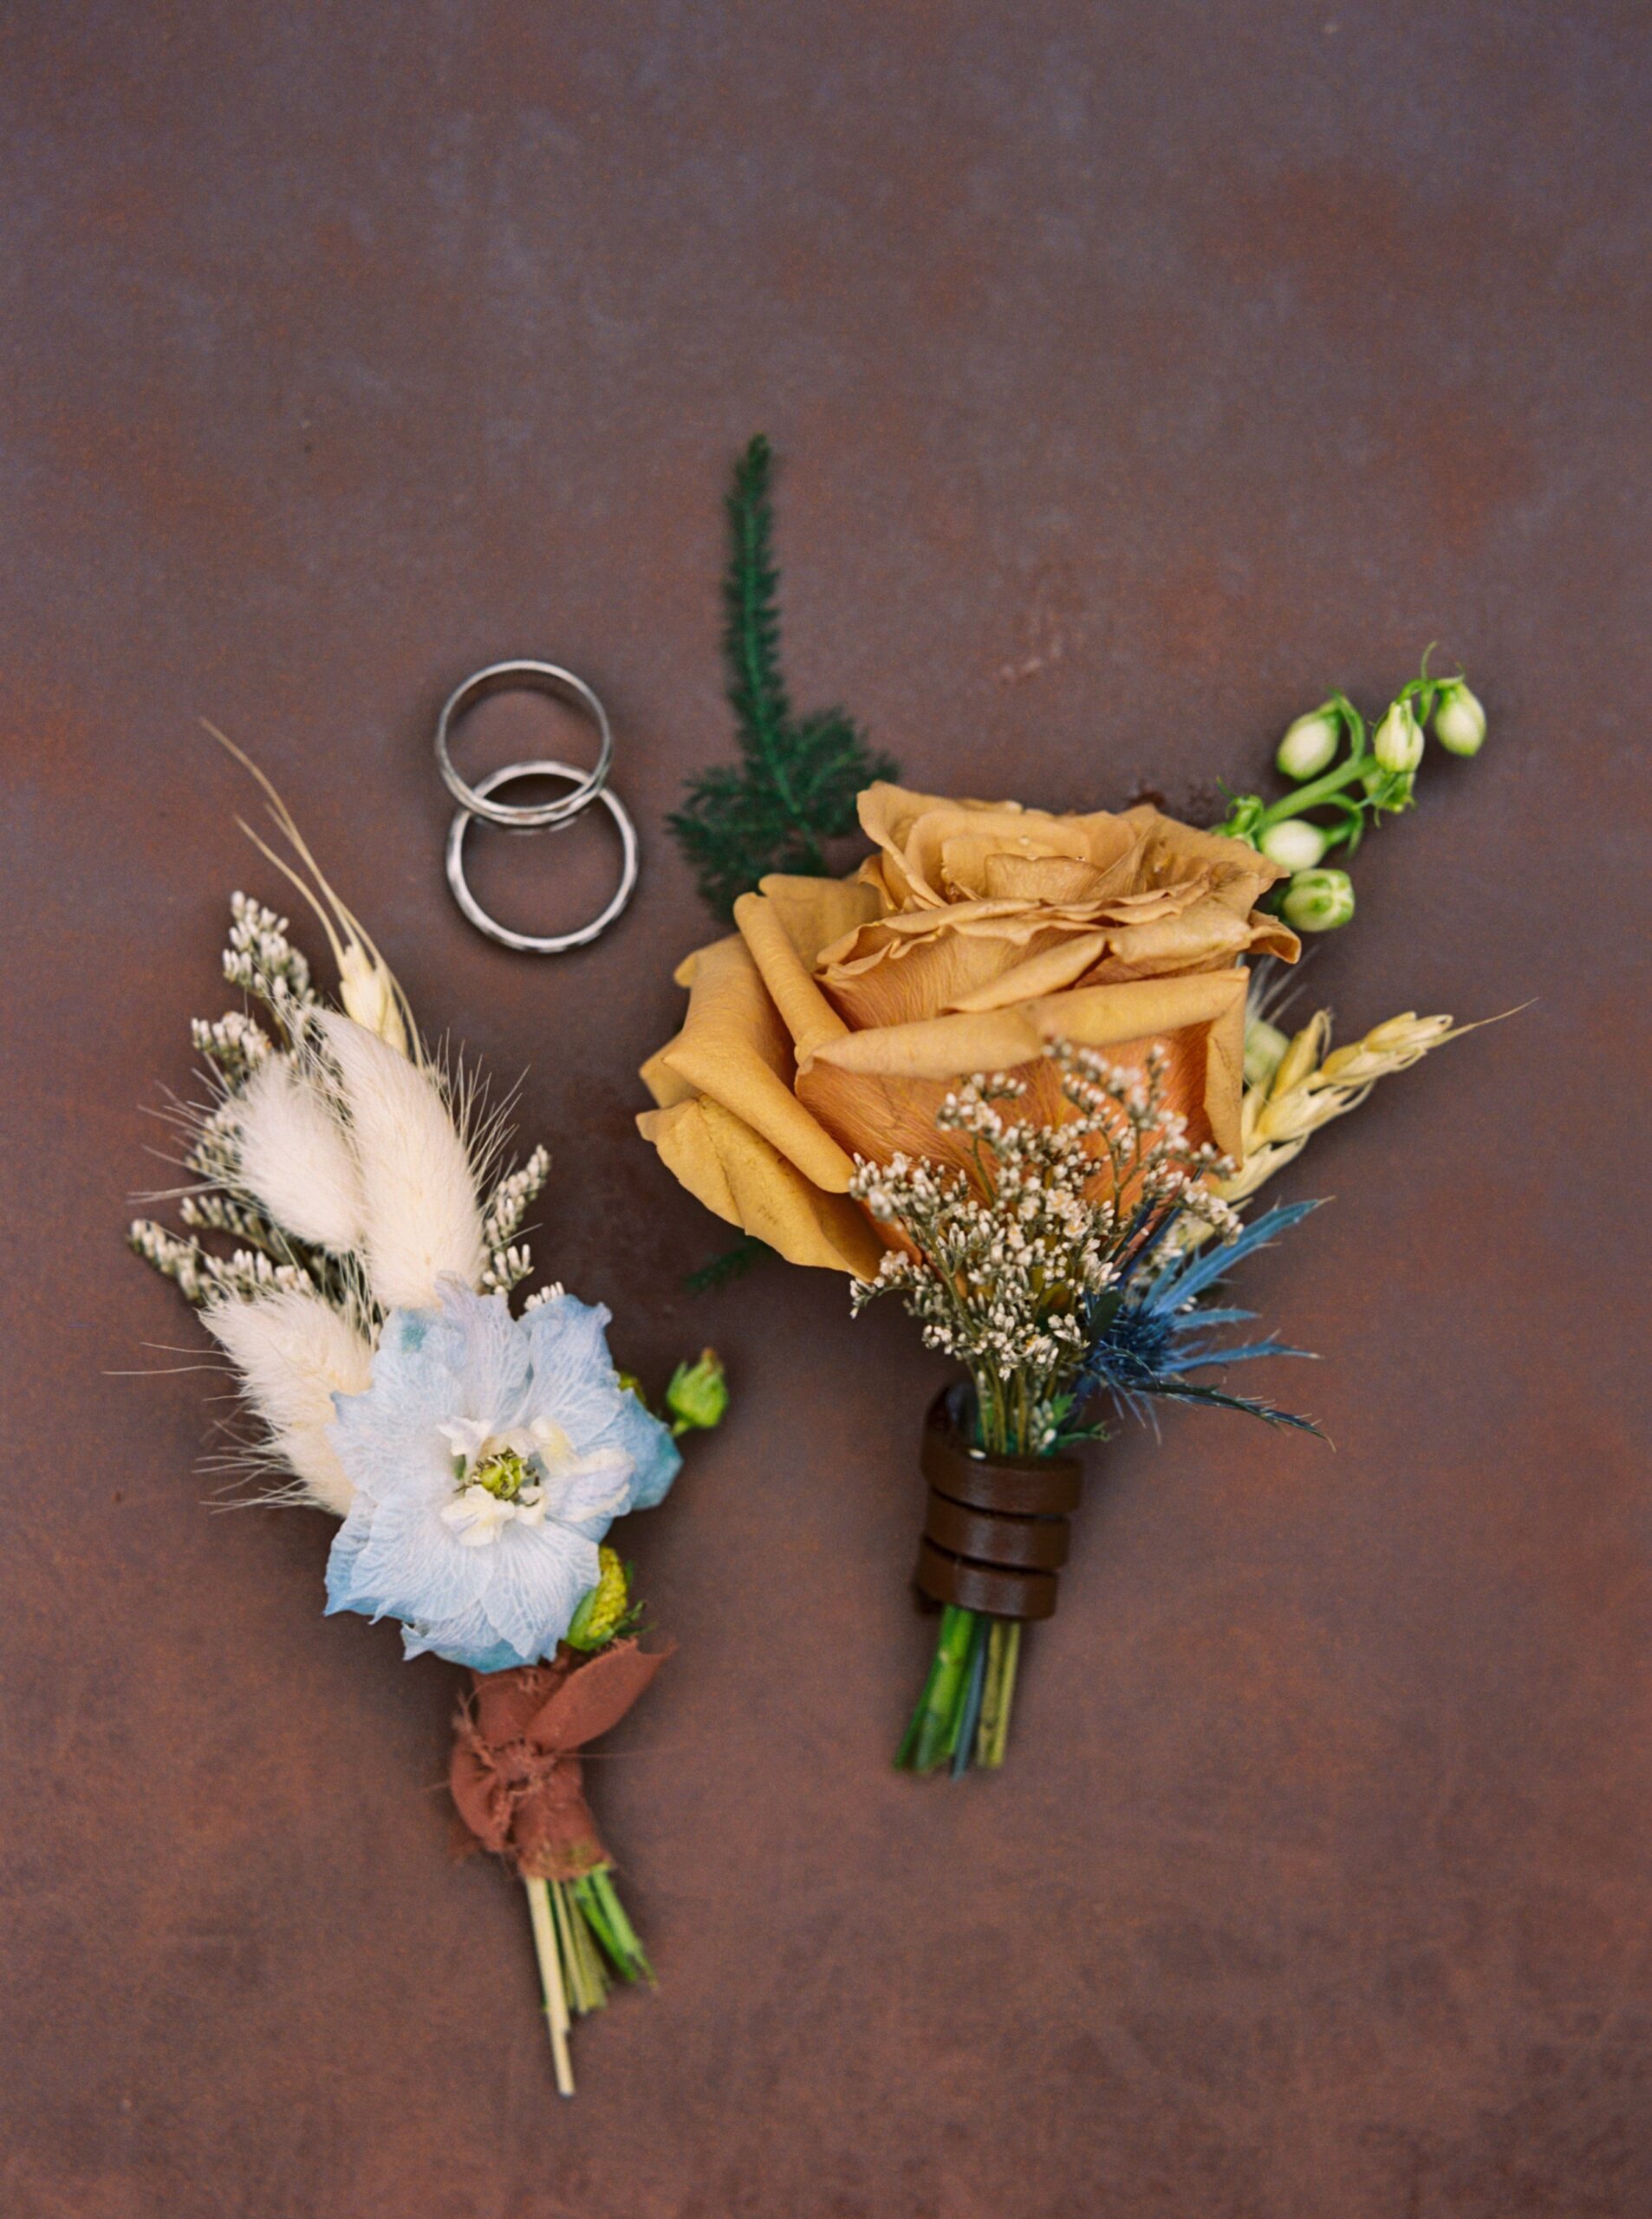  Boutonnieres by Little Thistle Floral Design and wedding rings on brown leather surface 